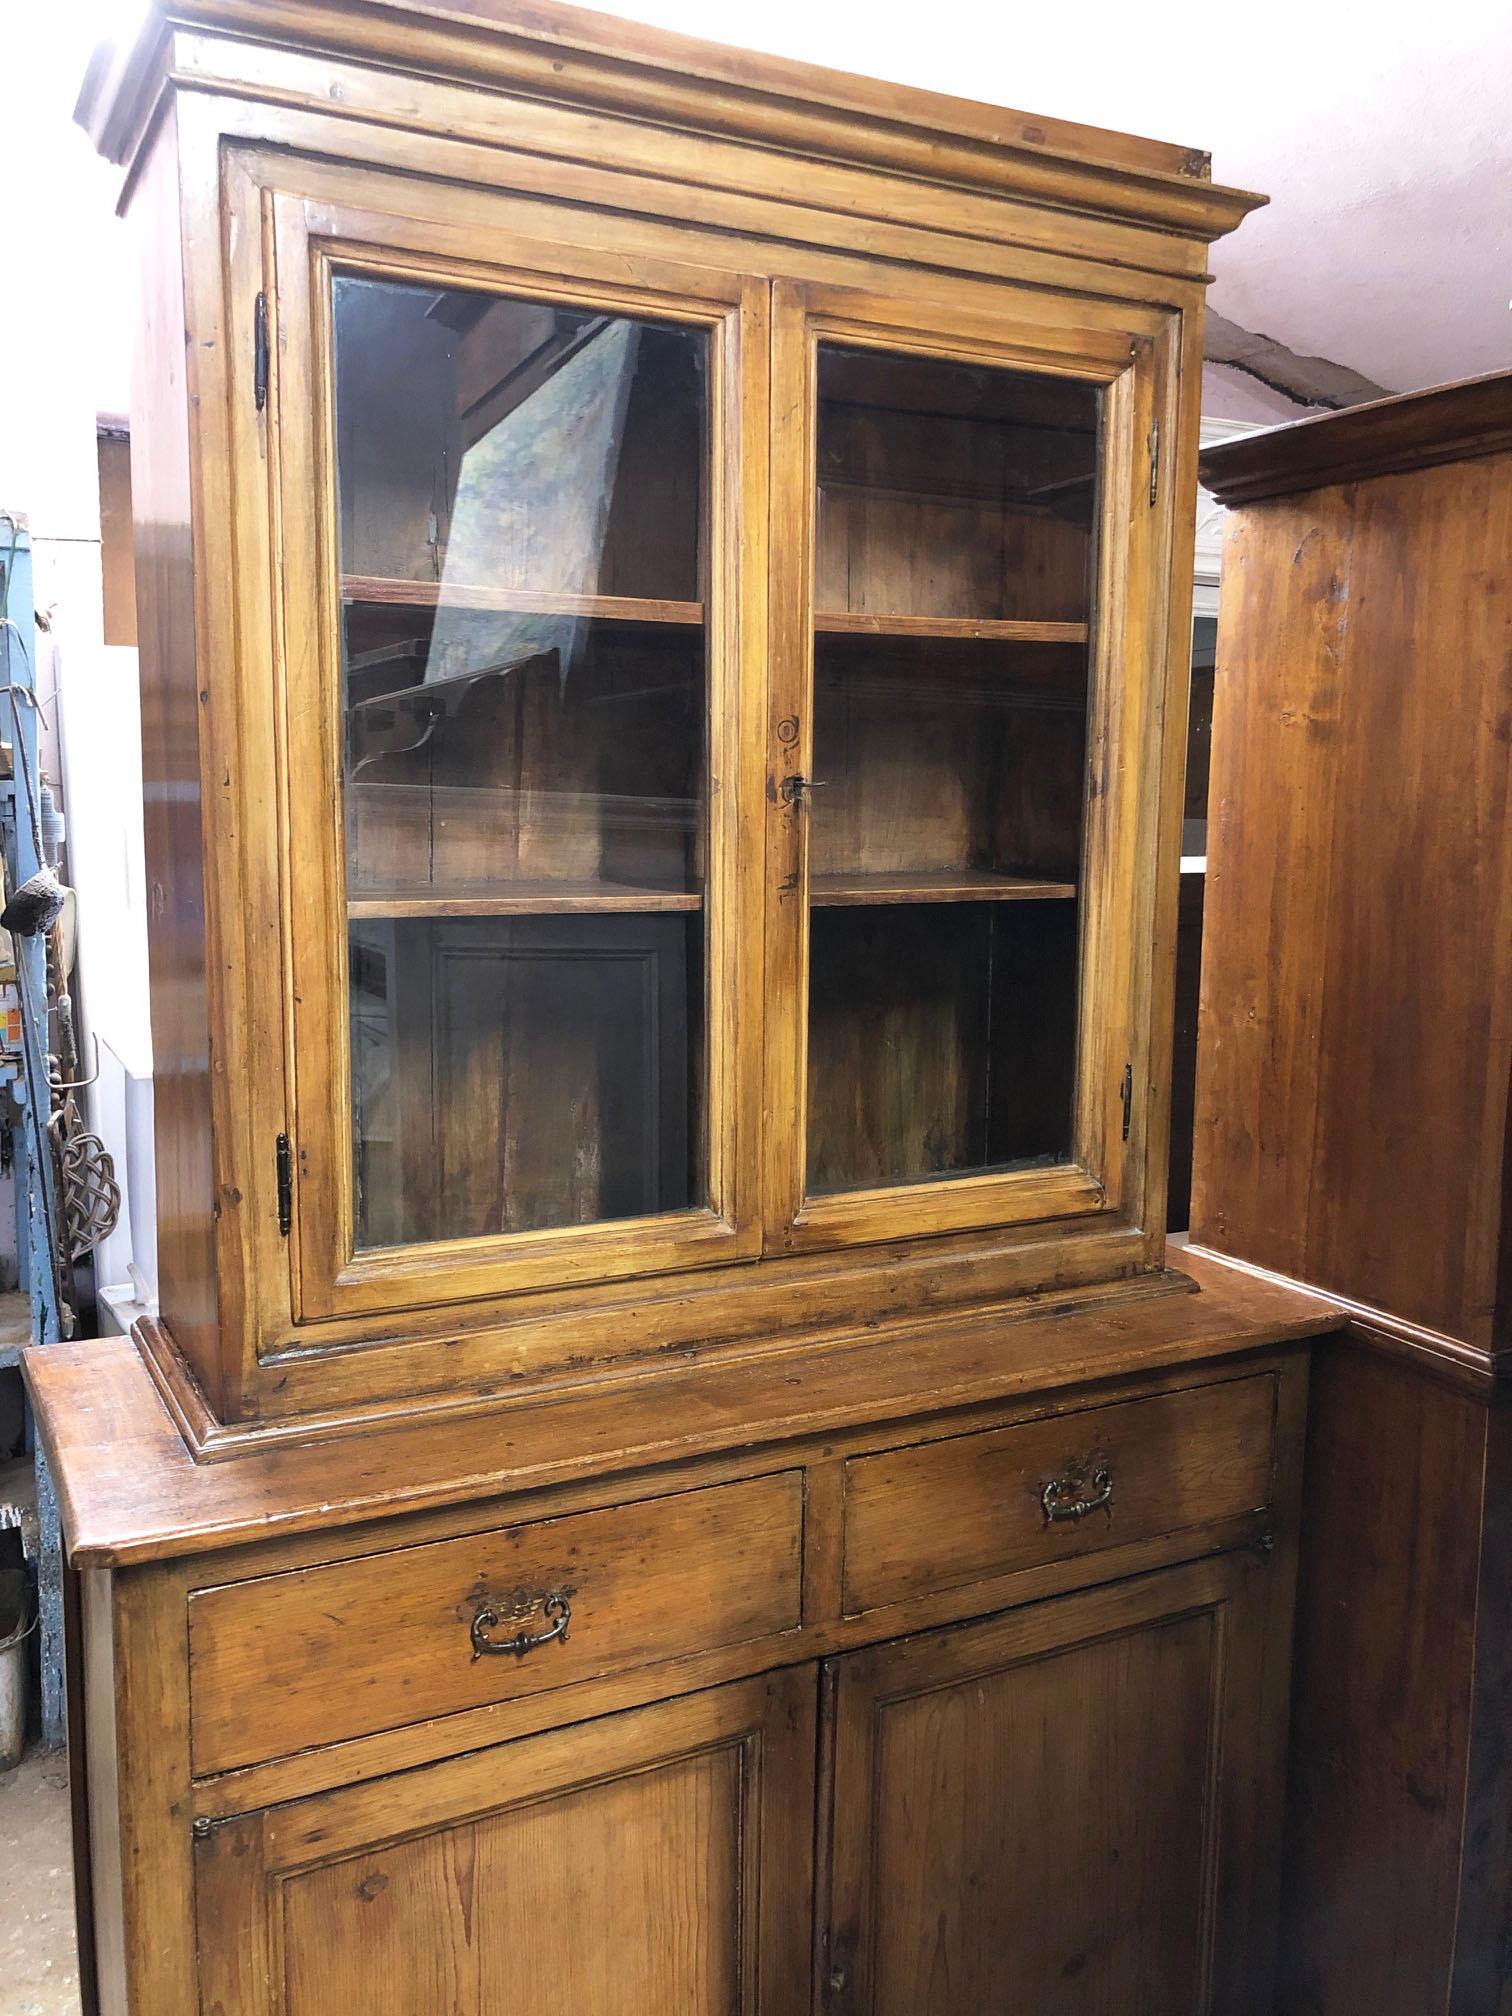 Antique showcase, original Tuscan, in fir.
Very nice for kitchen or living room or study.
It has a glass top, drawer and bottom with two doors.
For easy transport, the upper part separates from the lower part.